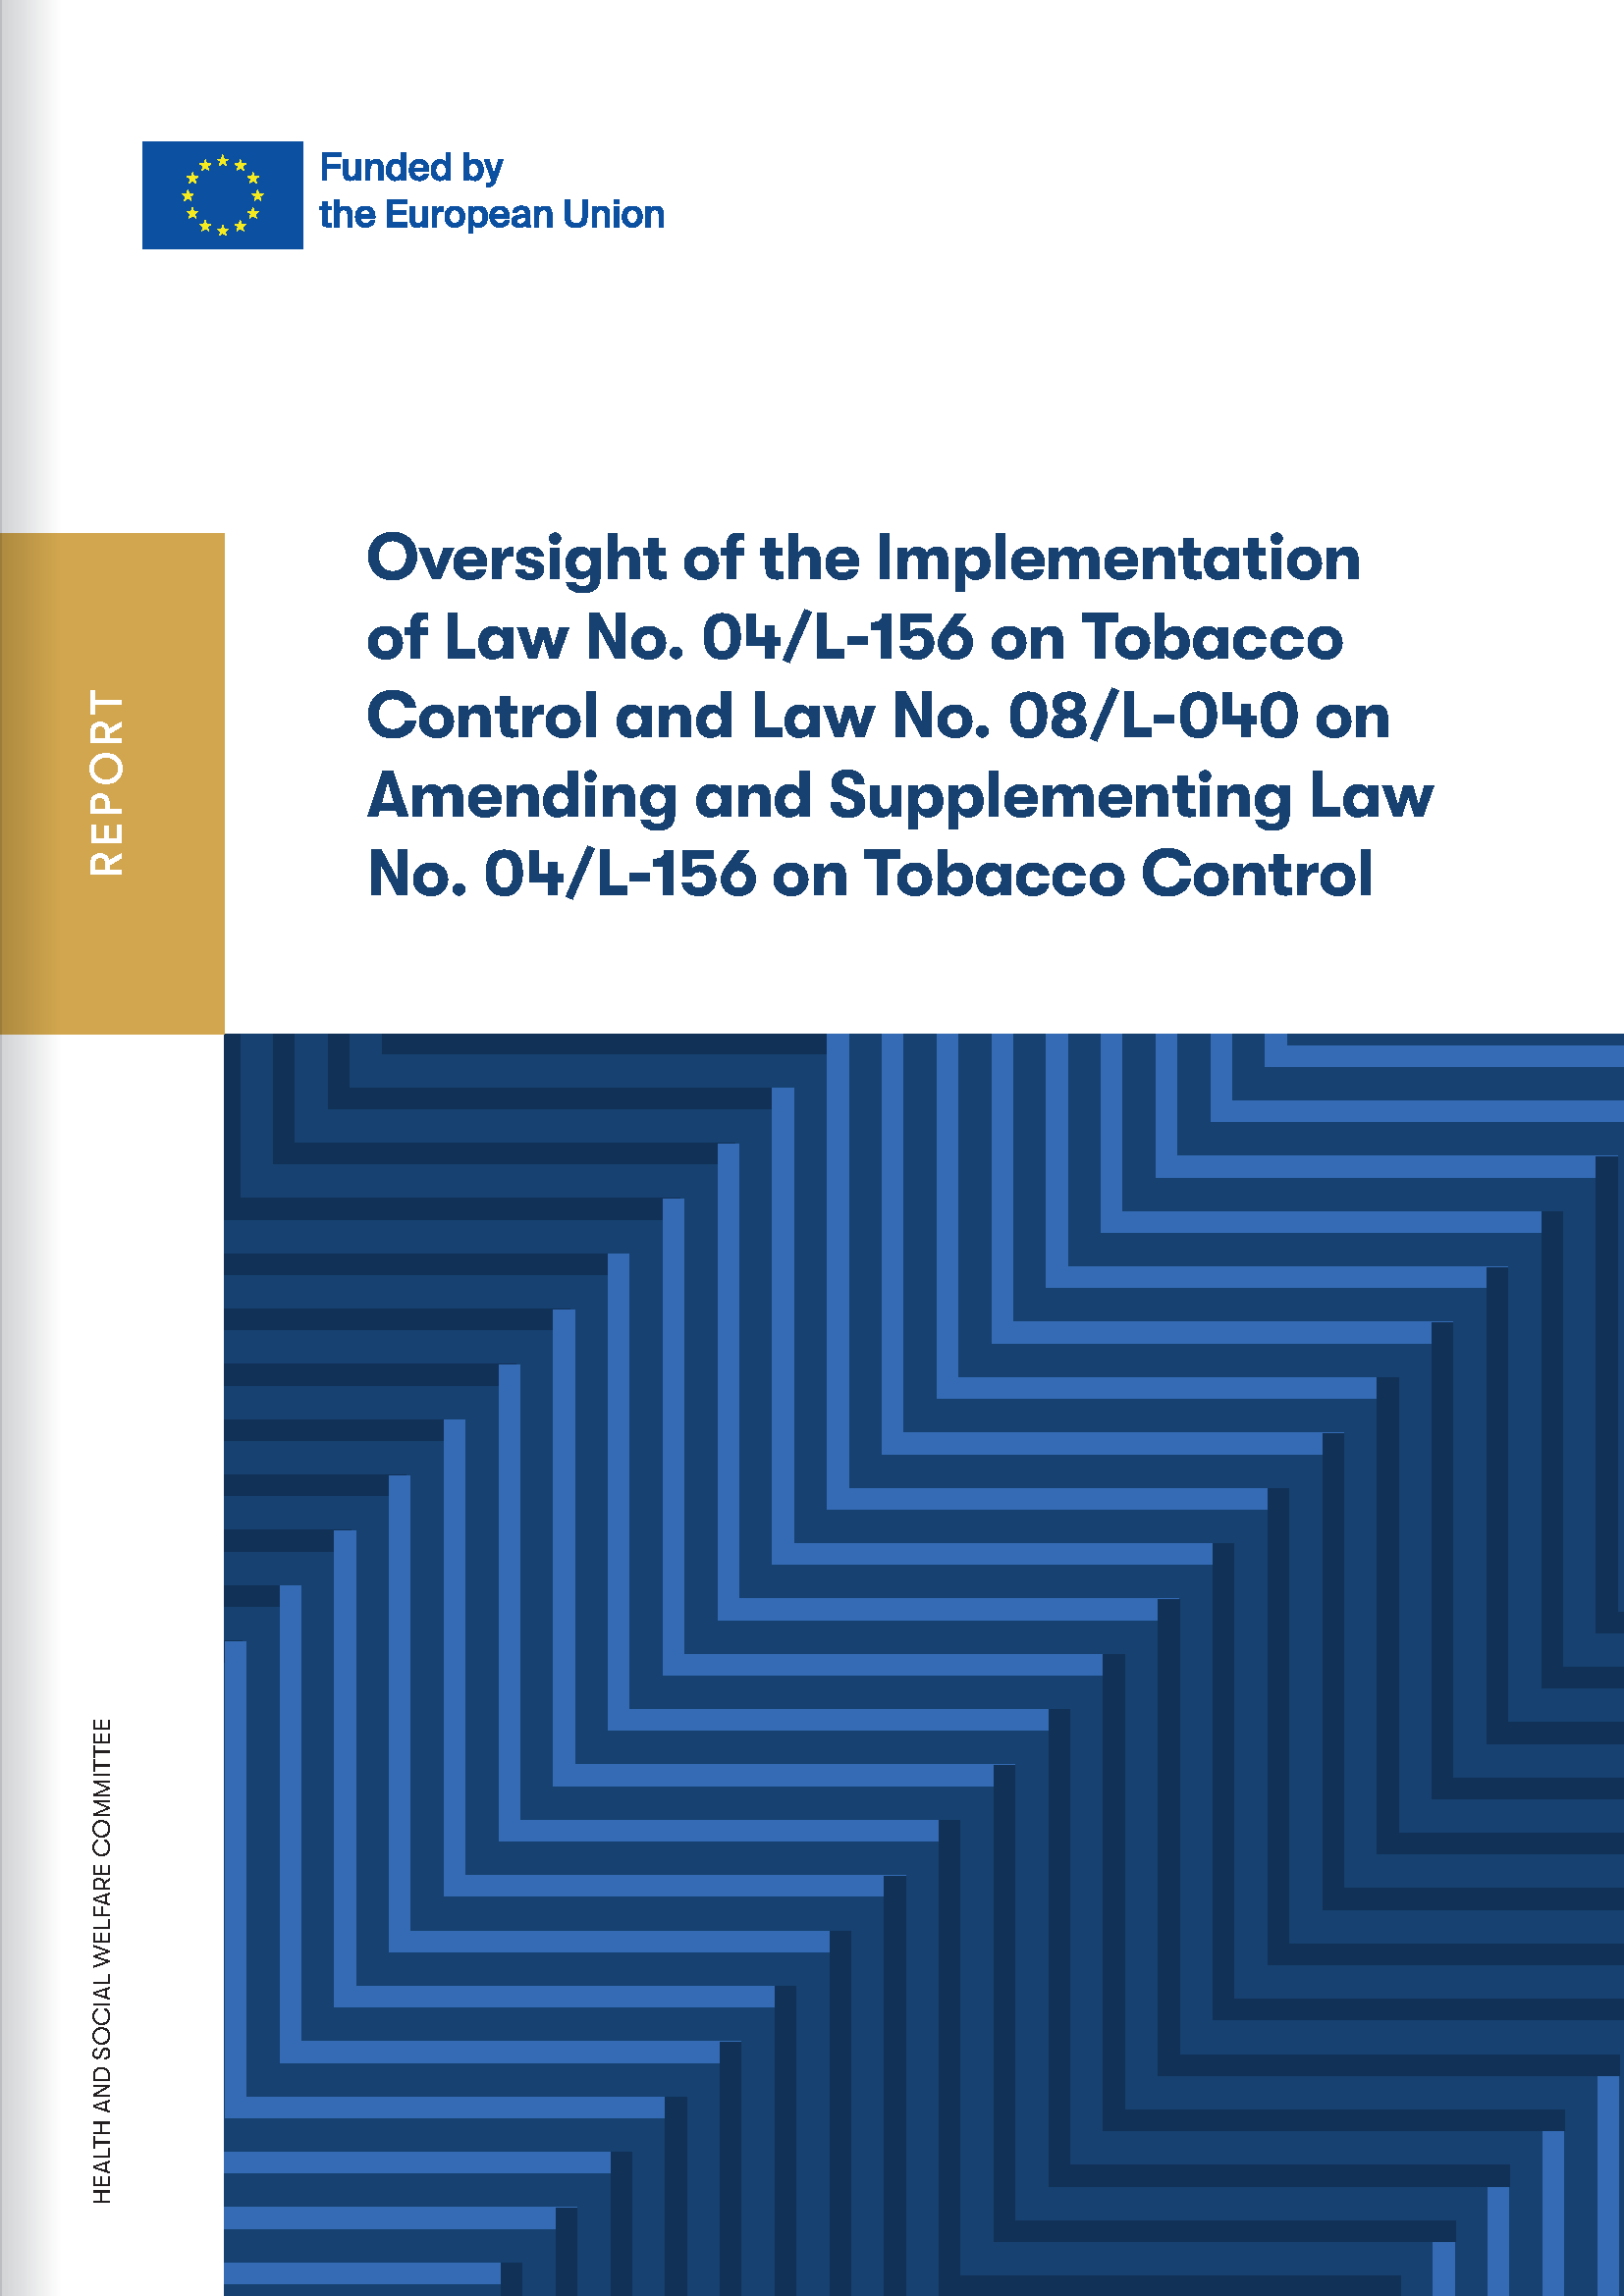 Oversight of the Implementation of Law No. 04/L-156 on Tobacco Control and Law No. 08/L-040 on Amending and Supplementing Law No. 04/L-156 on Tobacco Control